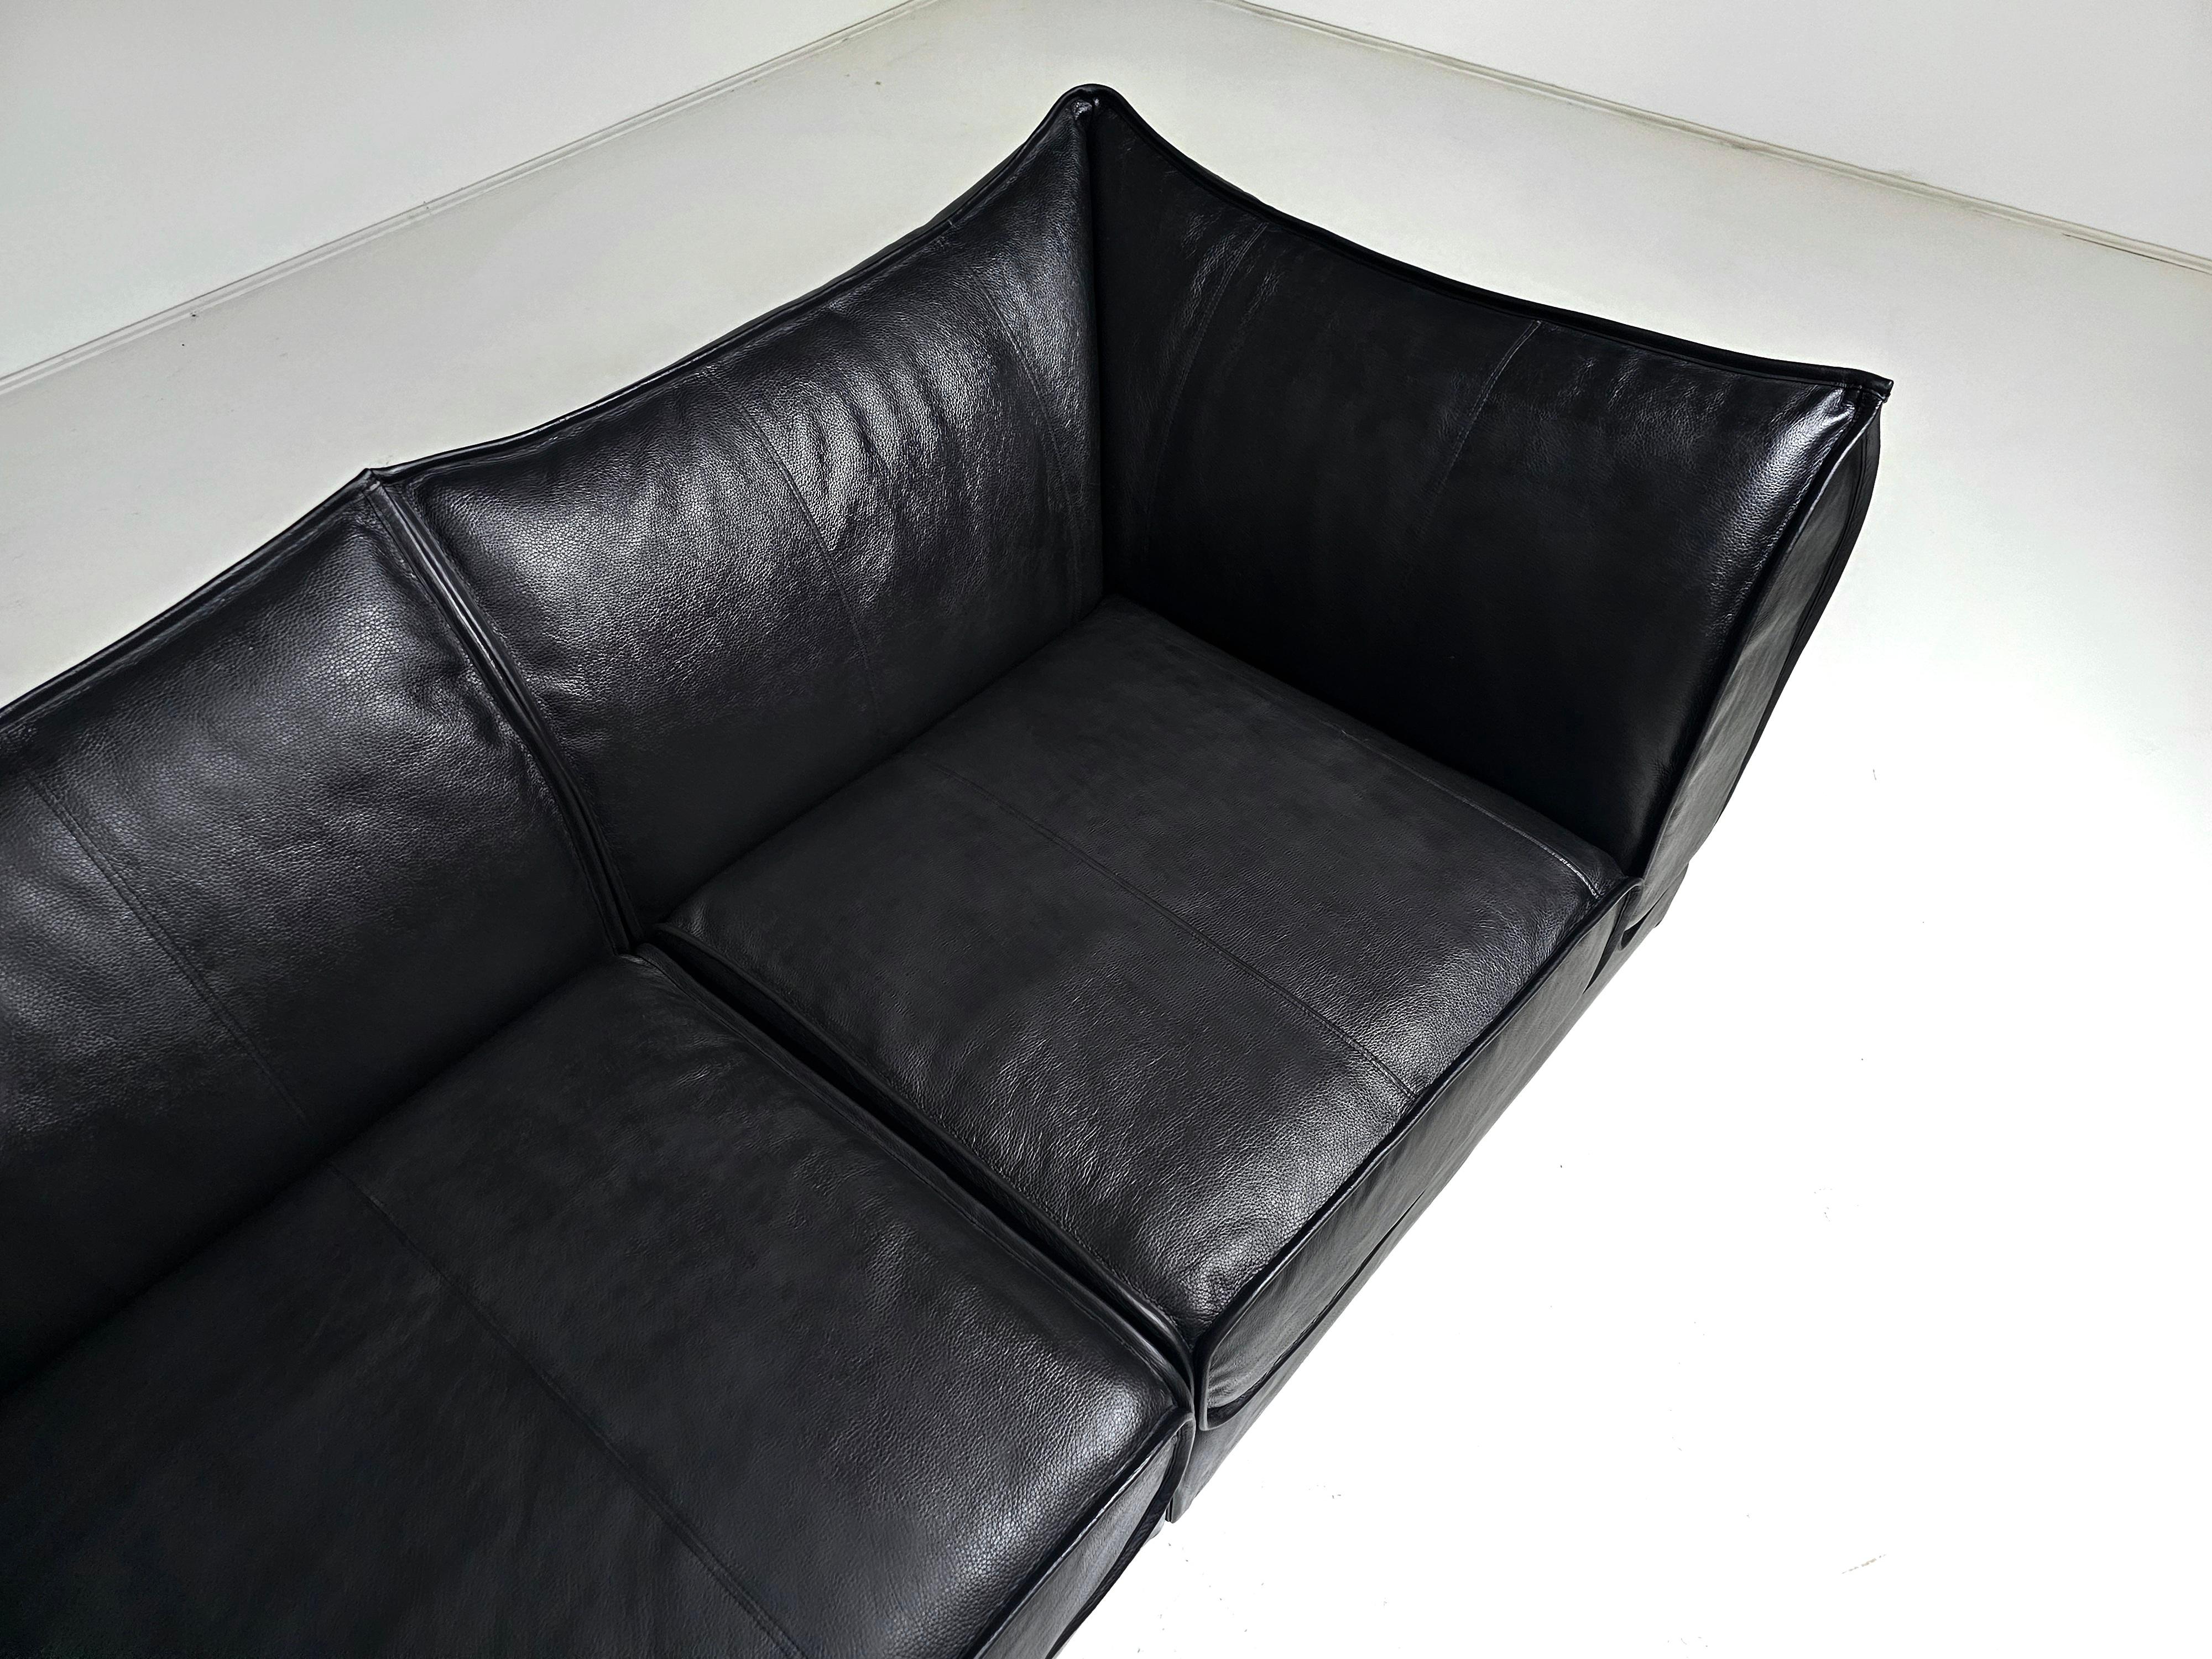 De Sede DS-19 black leather 4-seater 'Pagoda' Sectional Sofa, 1970s For Sale 2